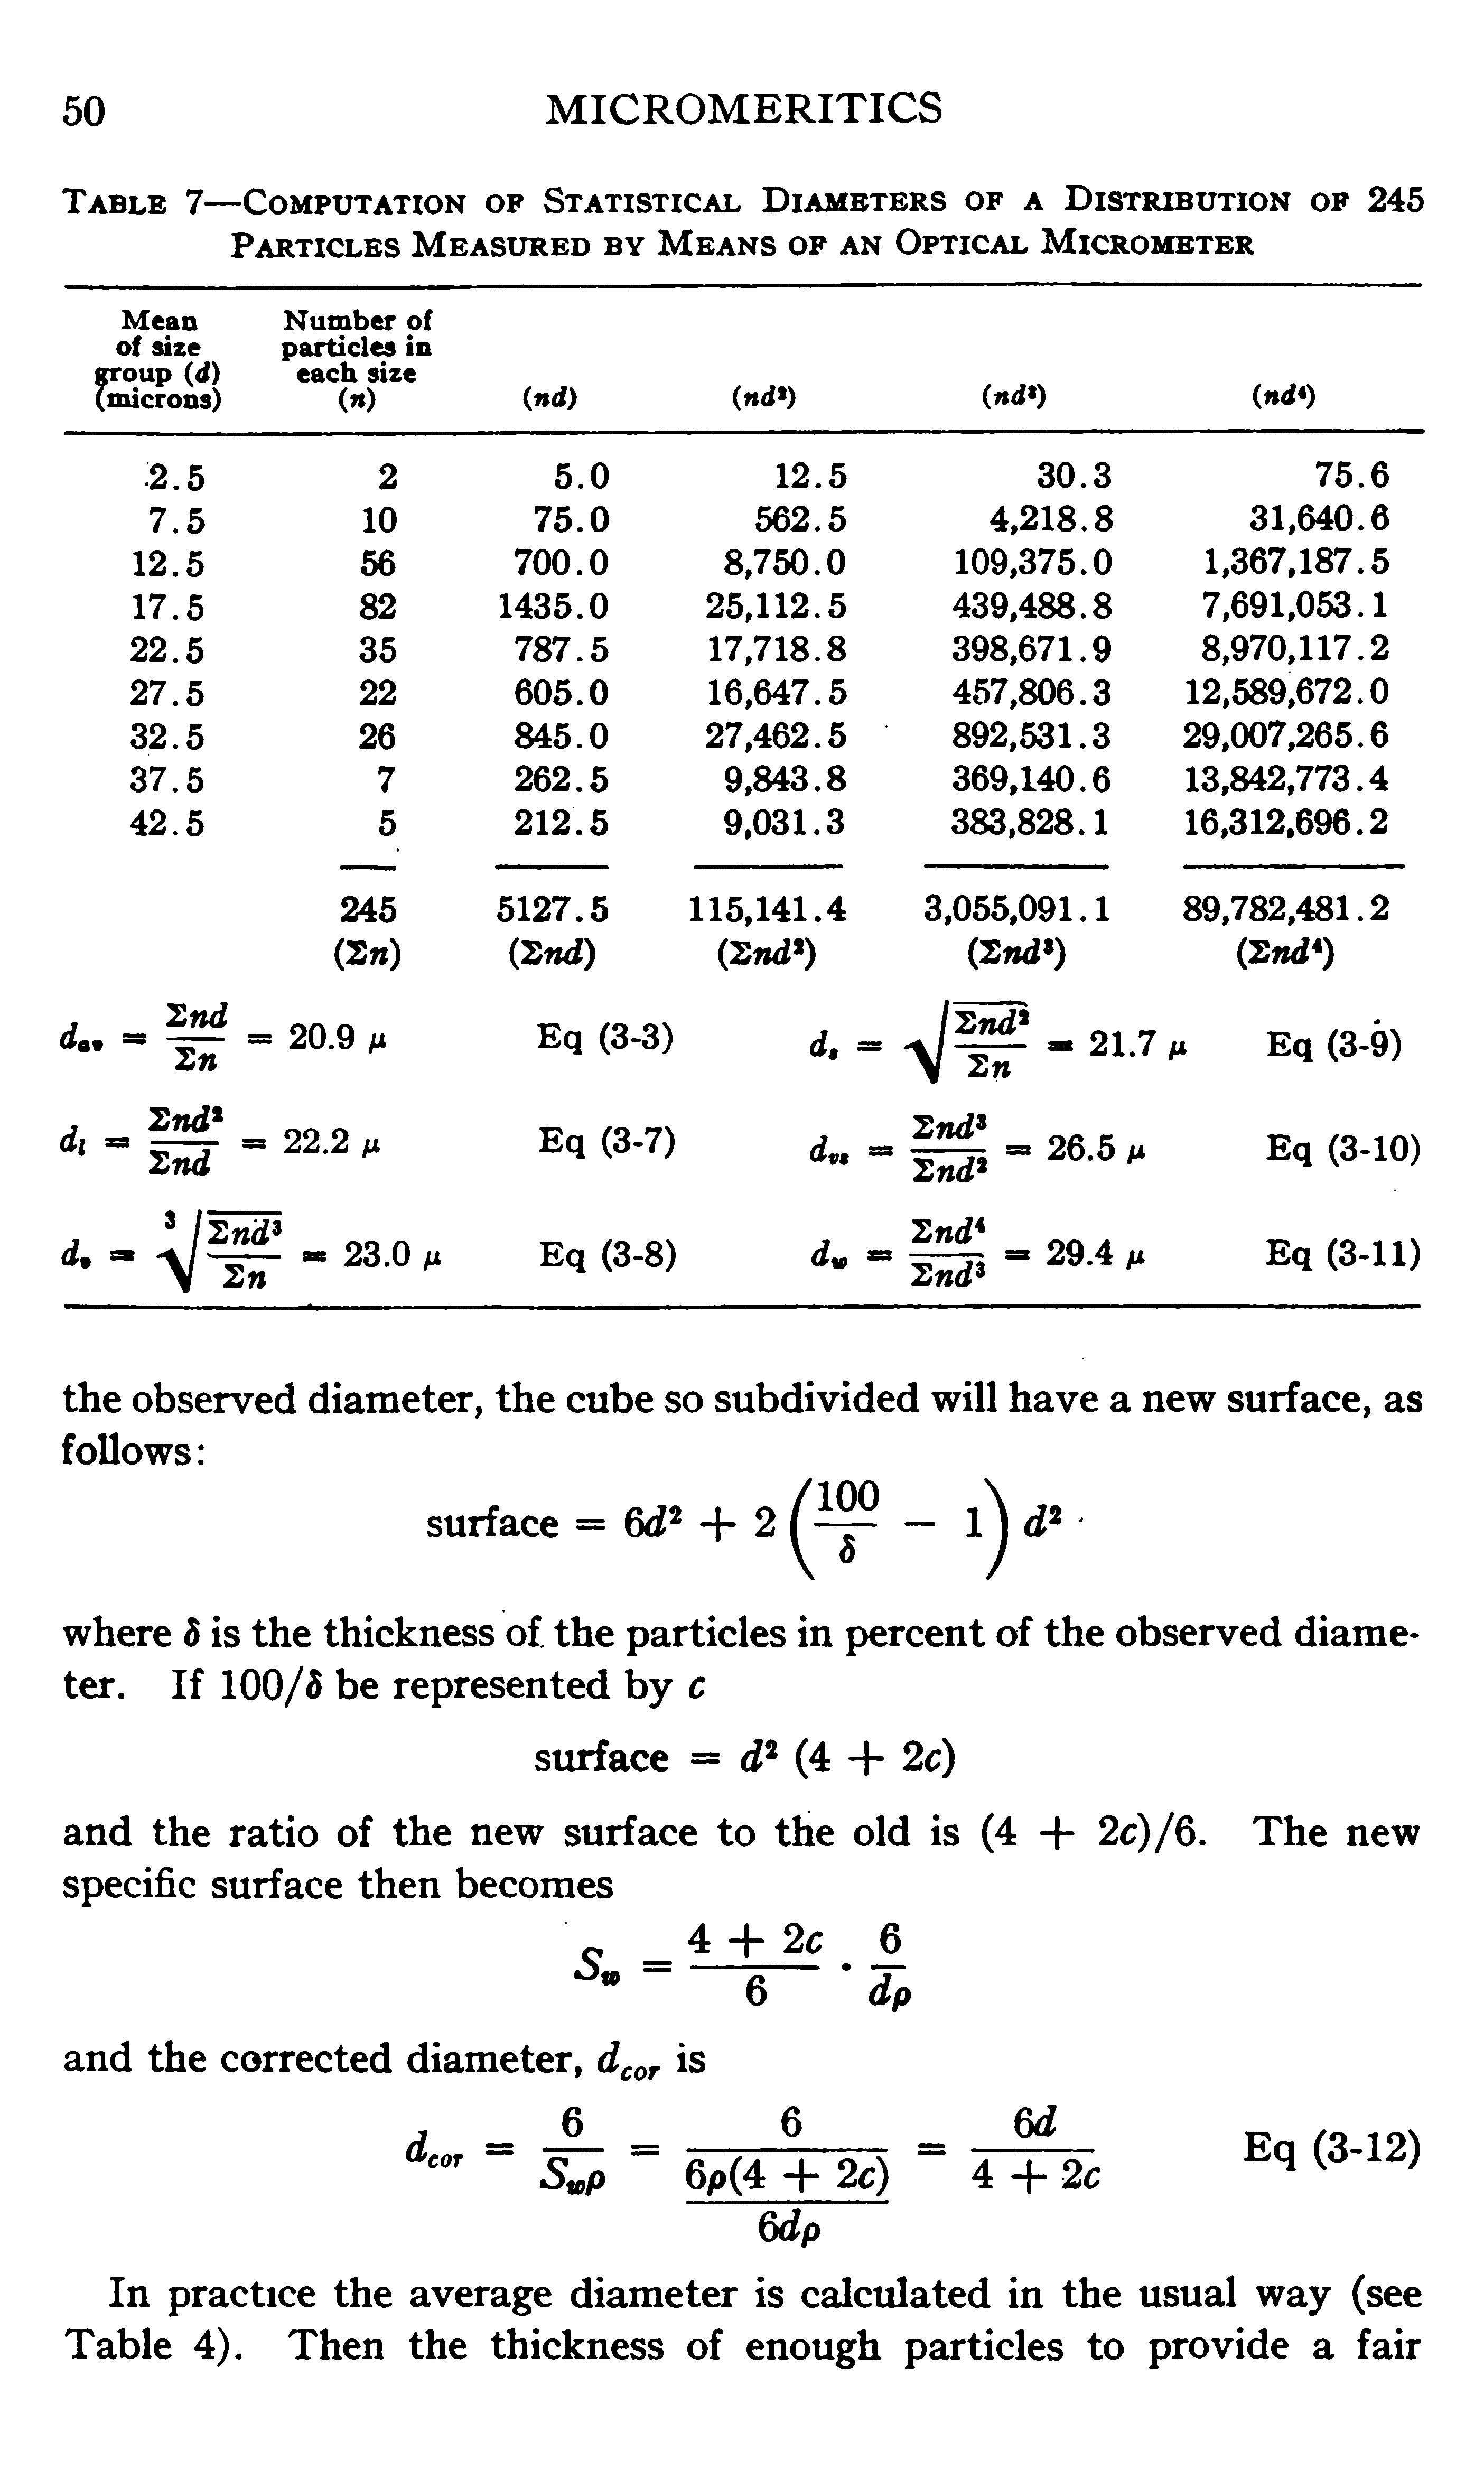 Table 7—Computation of Statistical Diameters of a Distribution of 245 Particles Measured by Means of an Optical Micrometer...